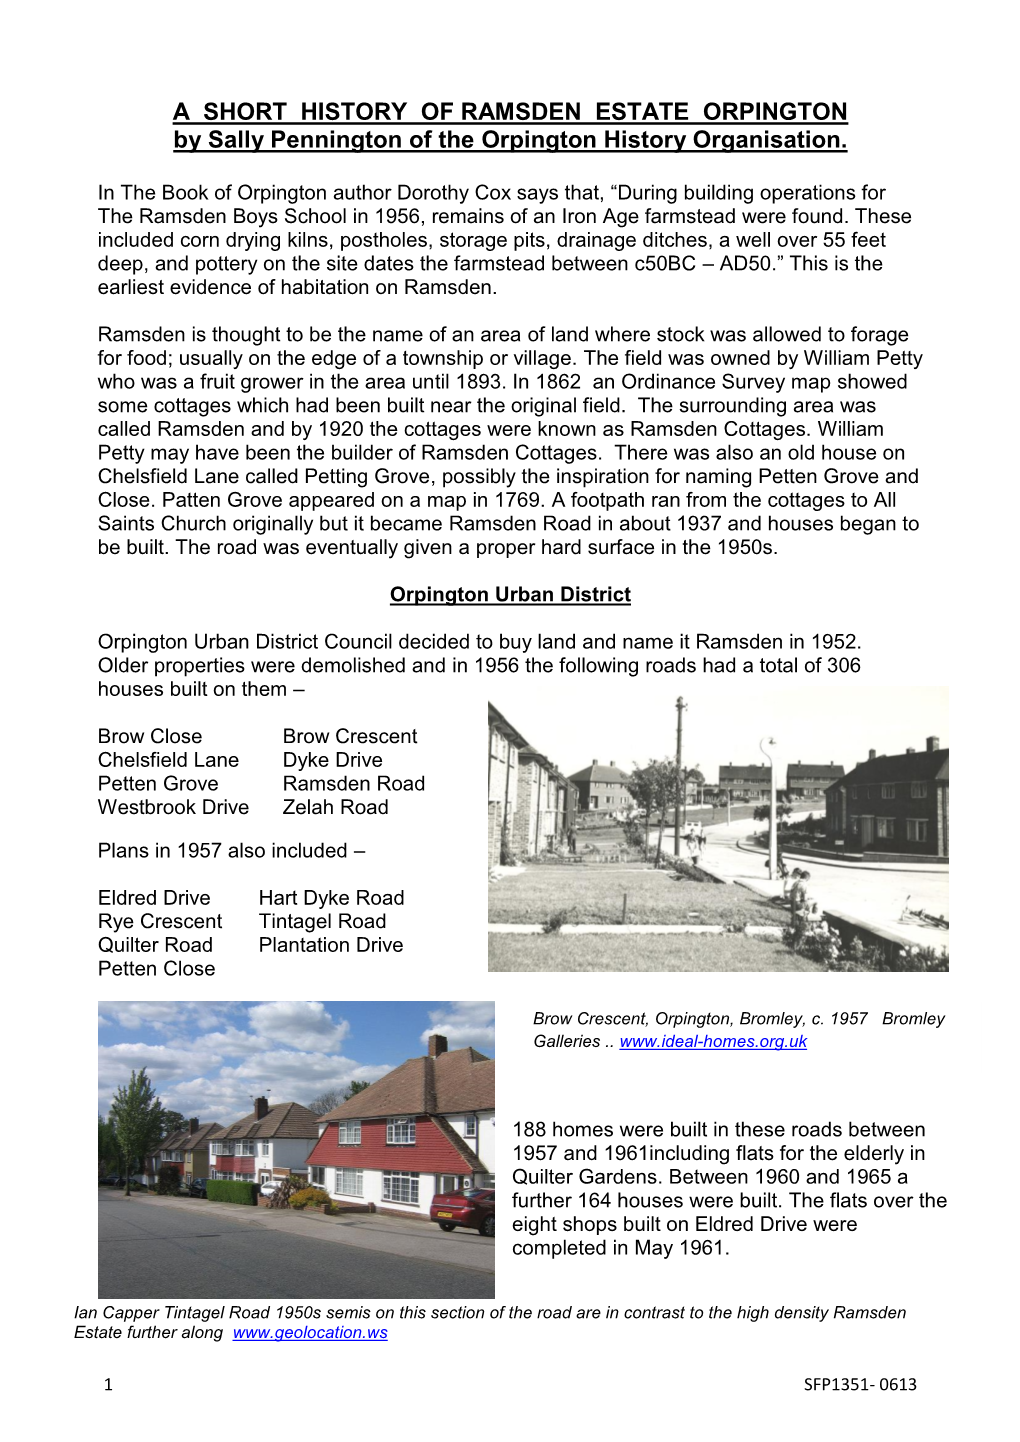 A SHORT HISTORY of RAMSDEN ESTATE ORPINGTON by Sally Pennington of the Orpington History Organisation